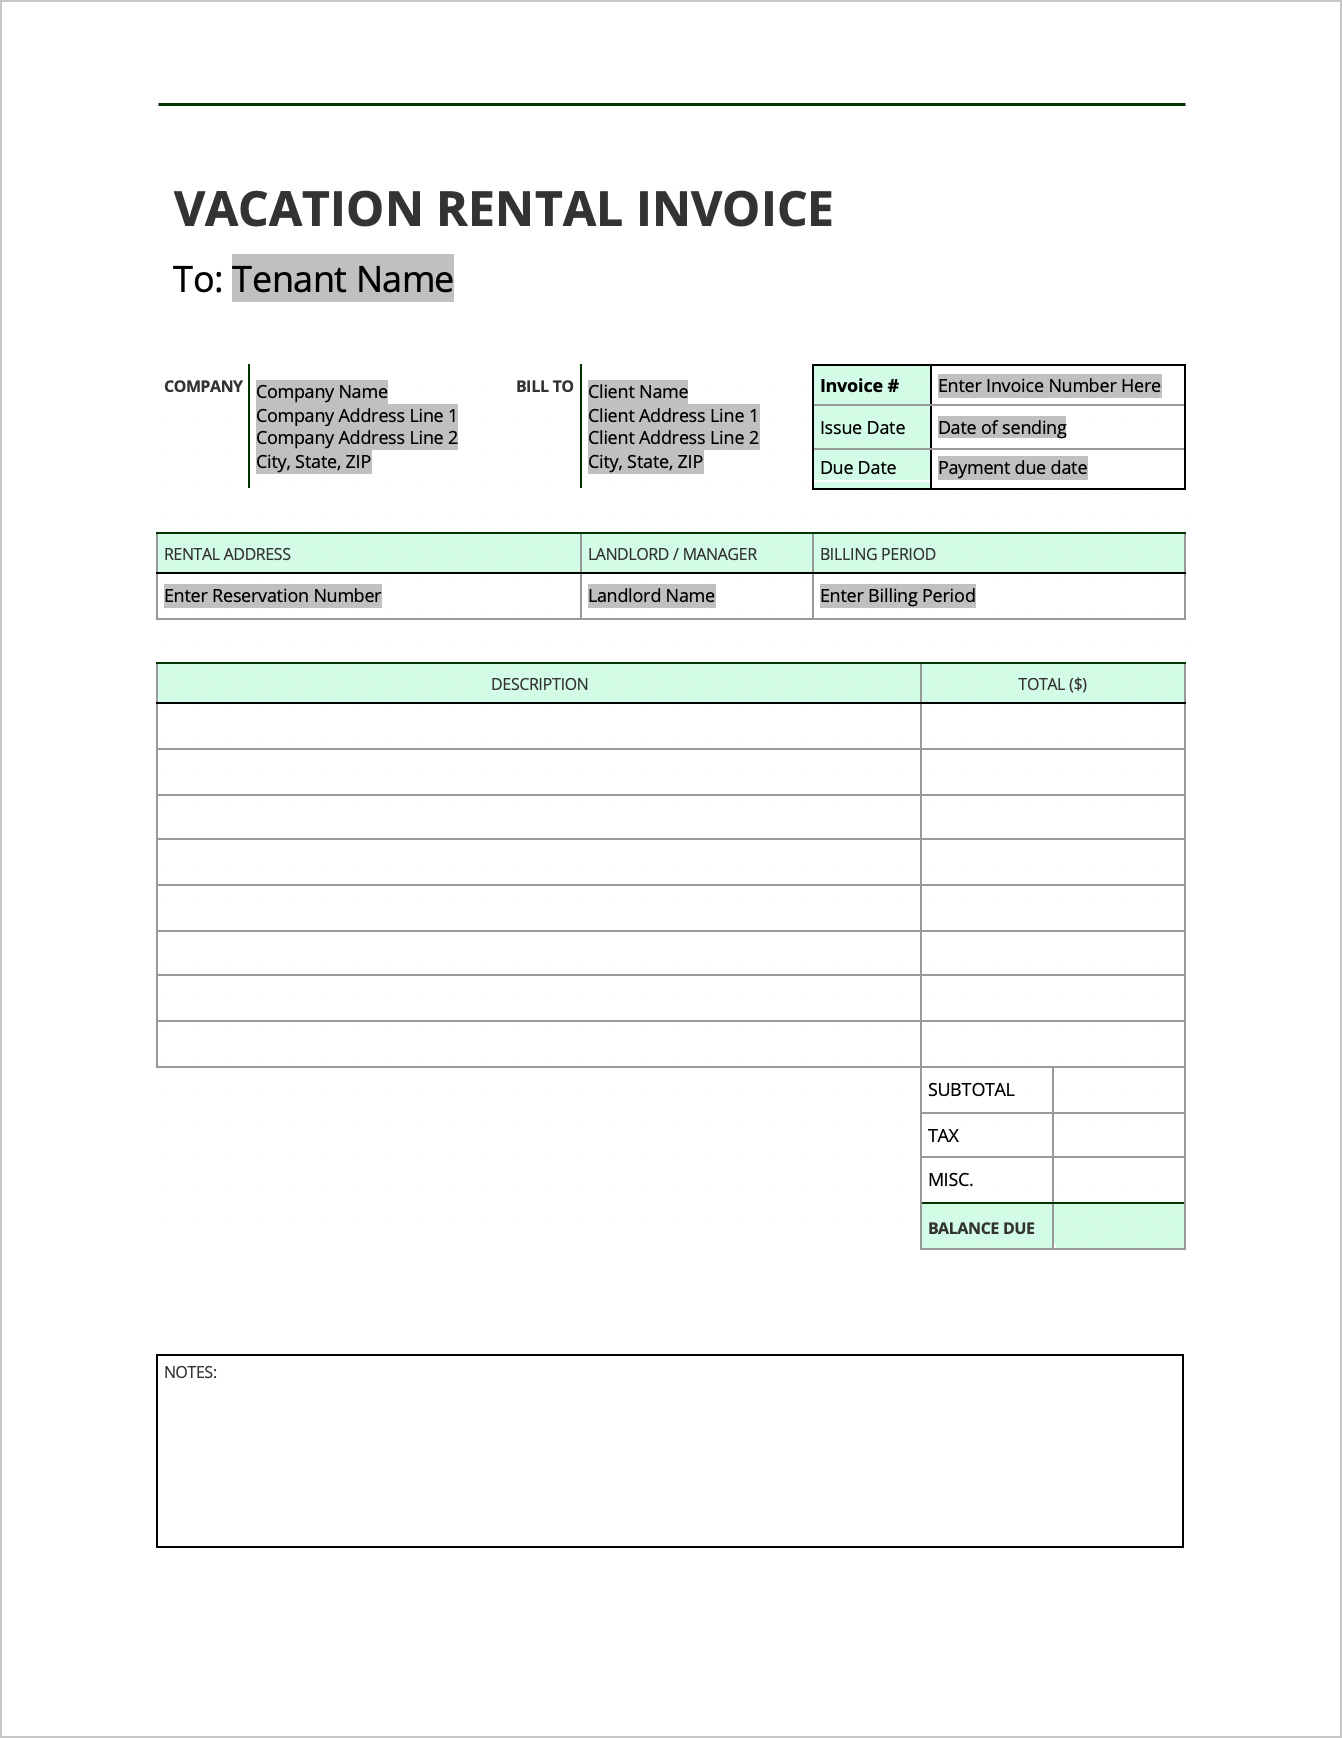 Free Vacation Rental Invoice Template  PDF  WORD  EXCEL Inside Invoice Template For Rent